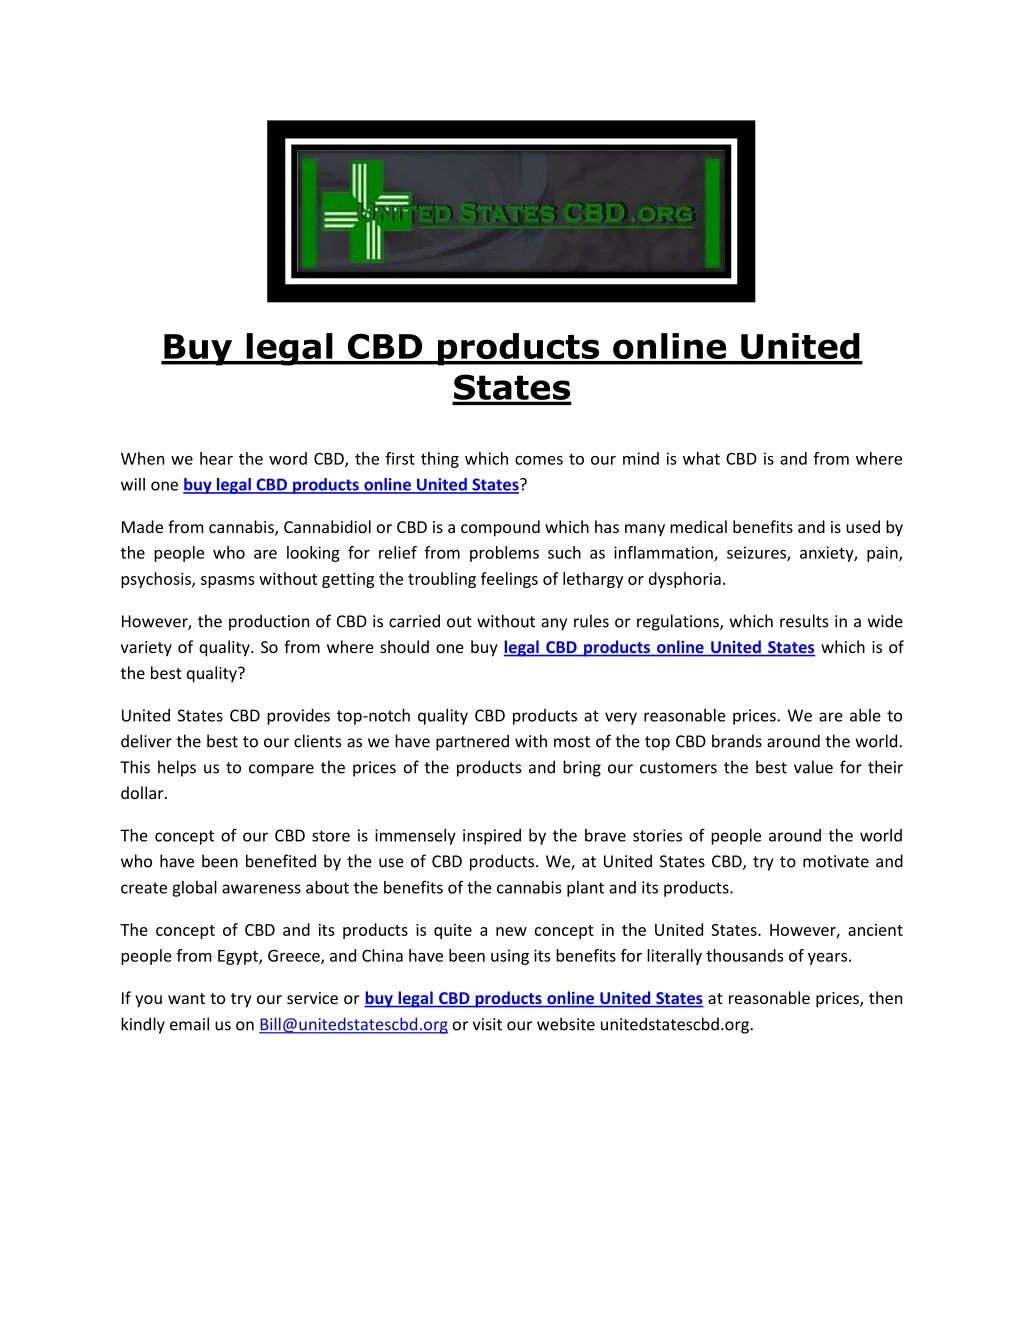 buy legal cbd products online united states when